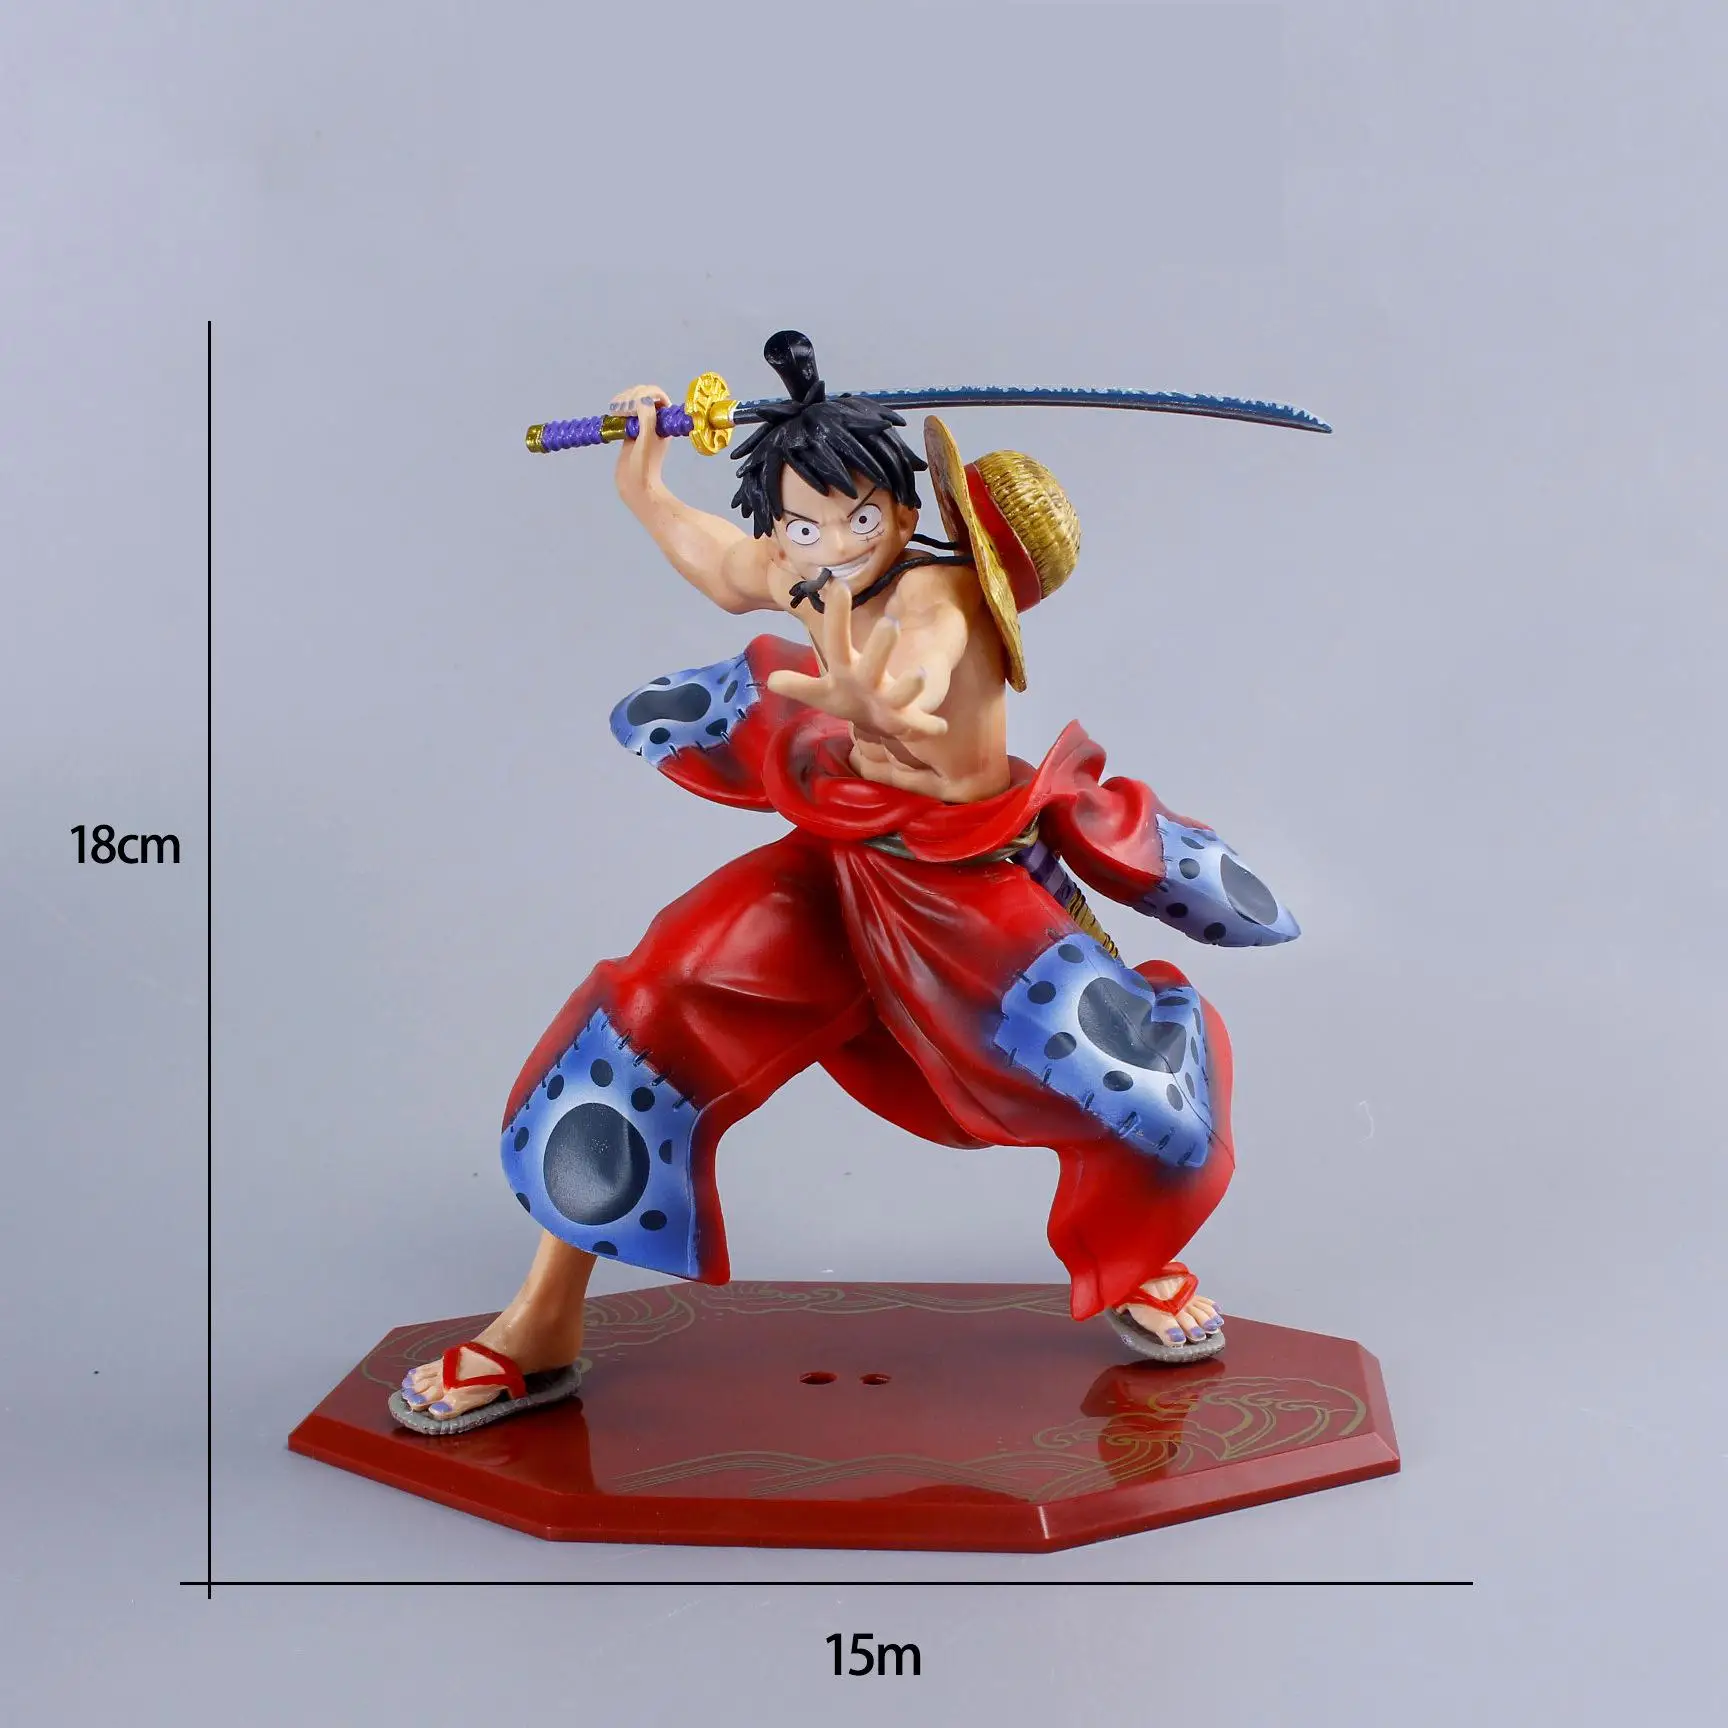 

18CM One Piece Monkey D Luffy Action Figure Adult Kids Figurine Japan PVC Model Collection Children's Toys Doll Gift